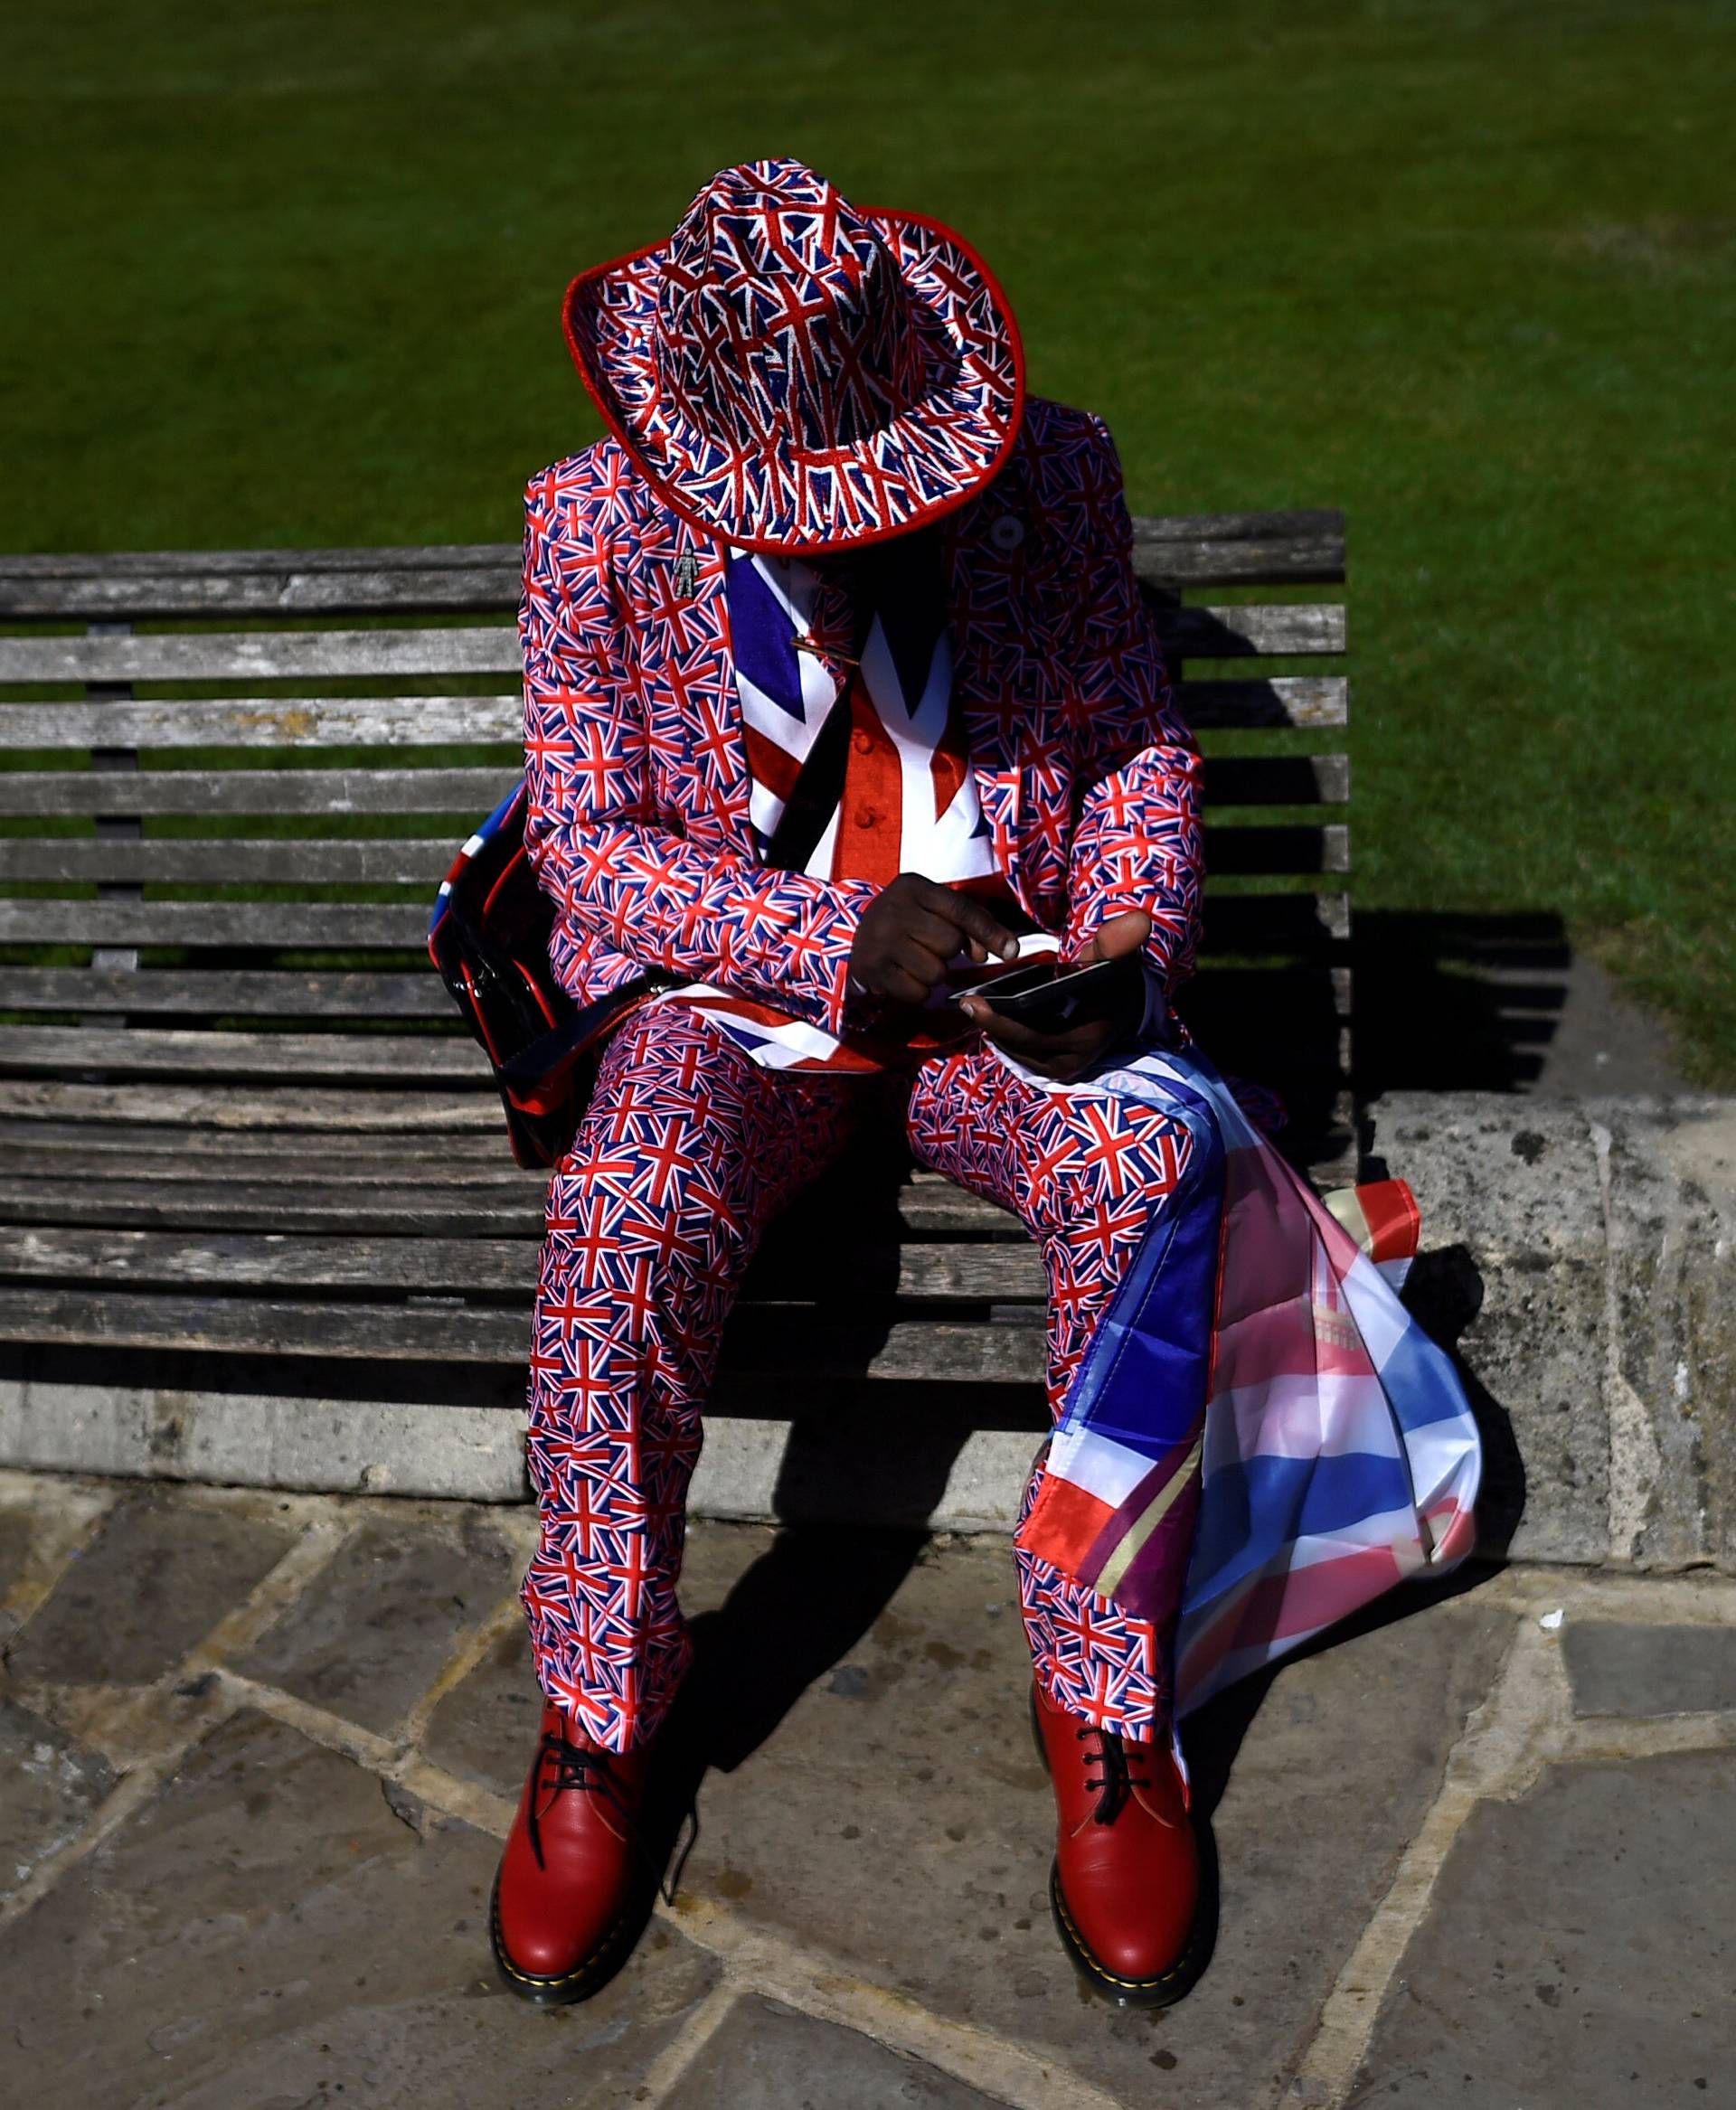 A man wears a Union flag themed suit outside Windsor Castle ahead of Britain's Prince Harry's wedding to Meghan Markle in Windsor